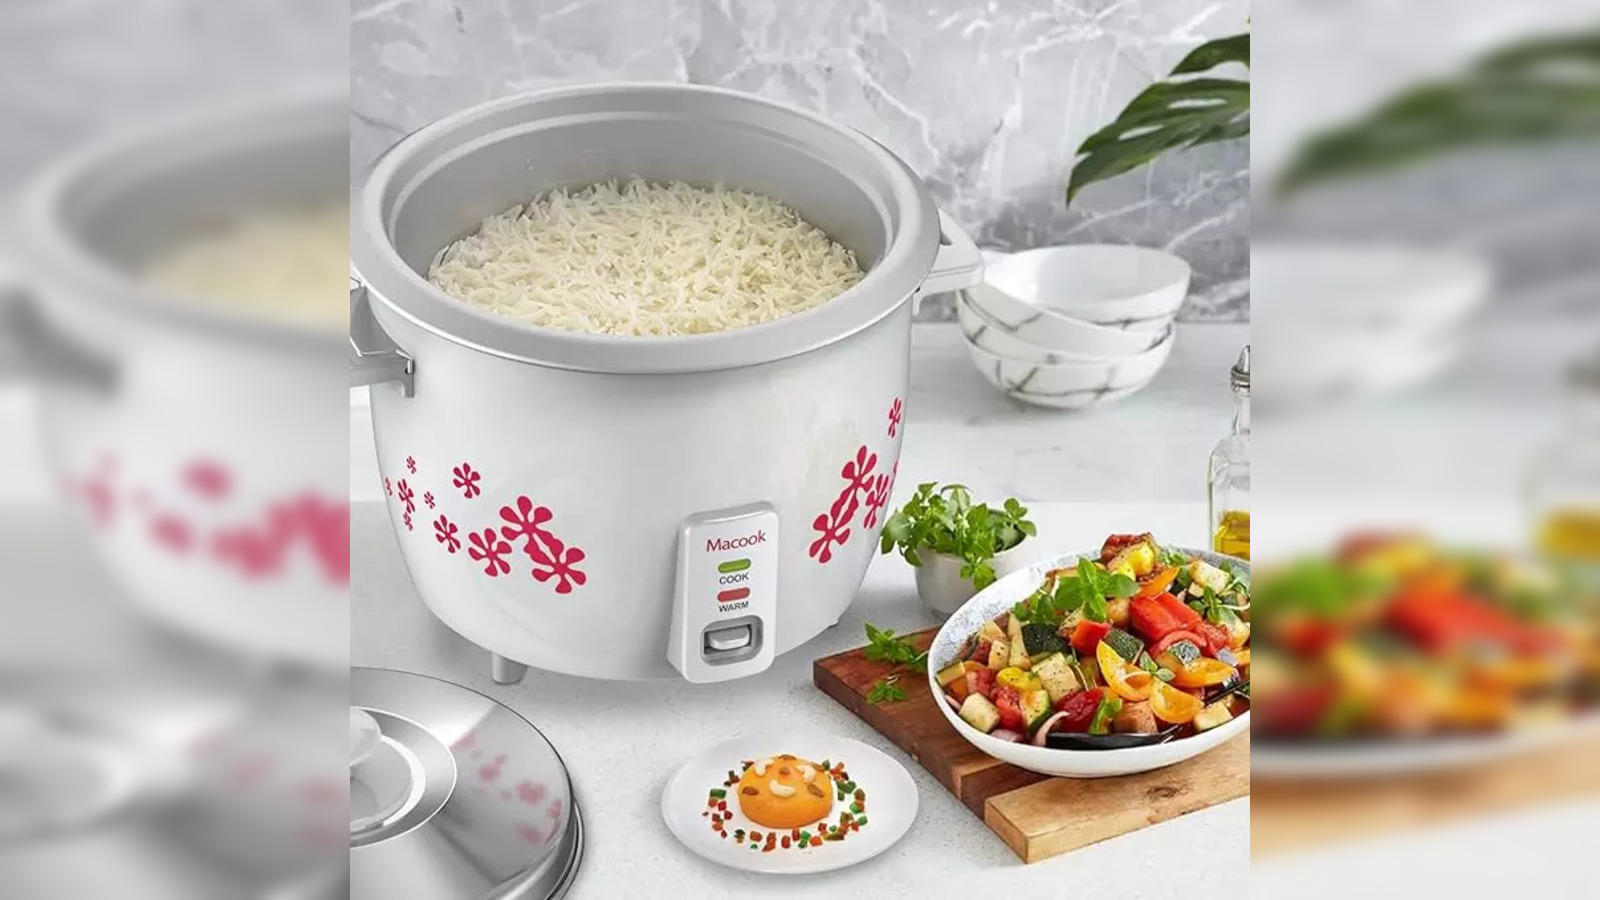 Nicest Looking Rice Cooker? : r/RiceCookerRecipes